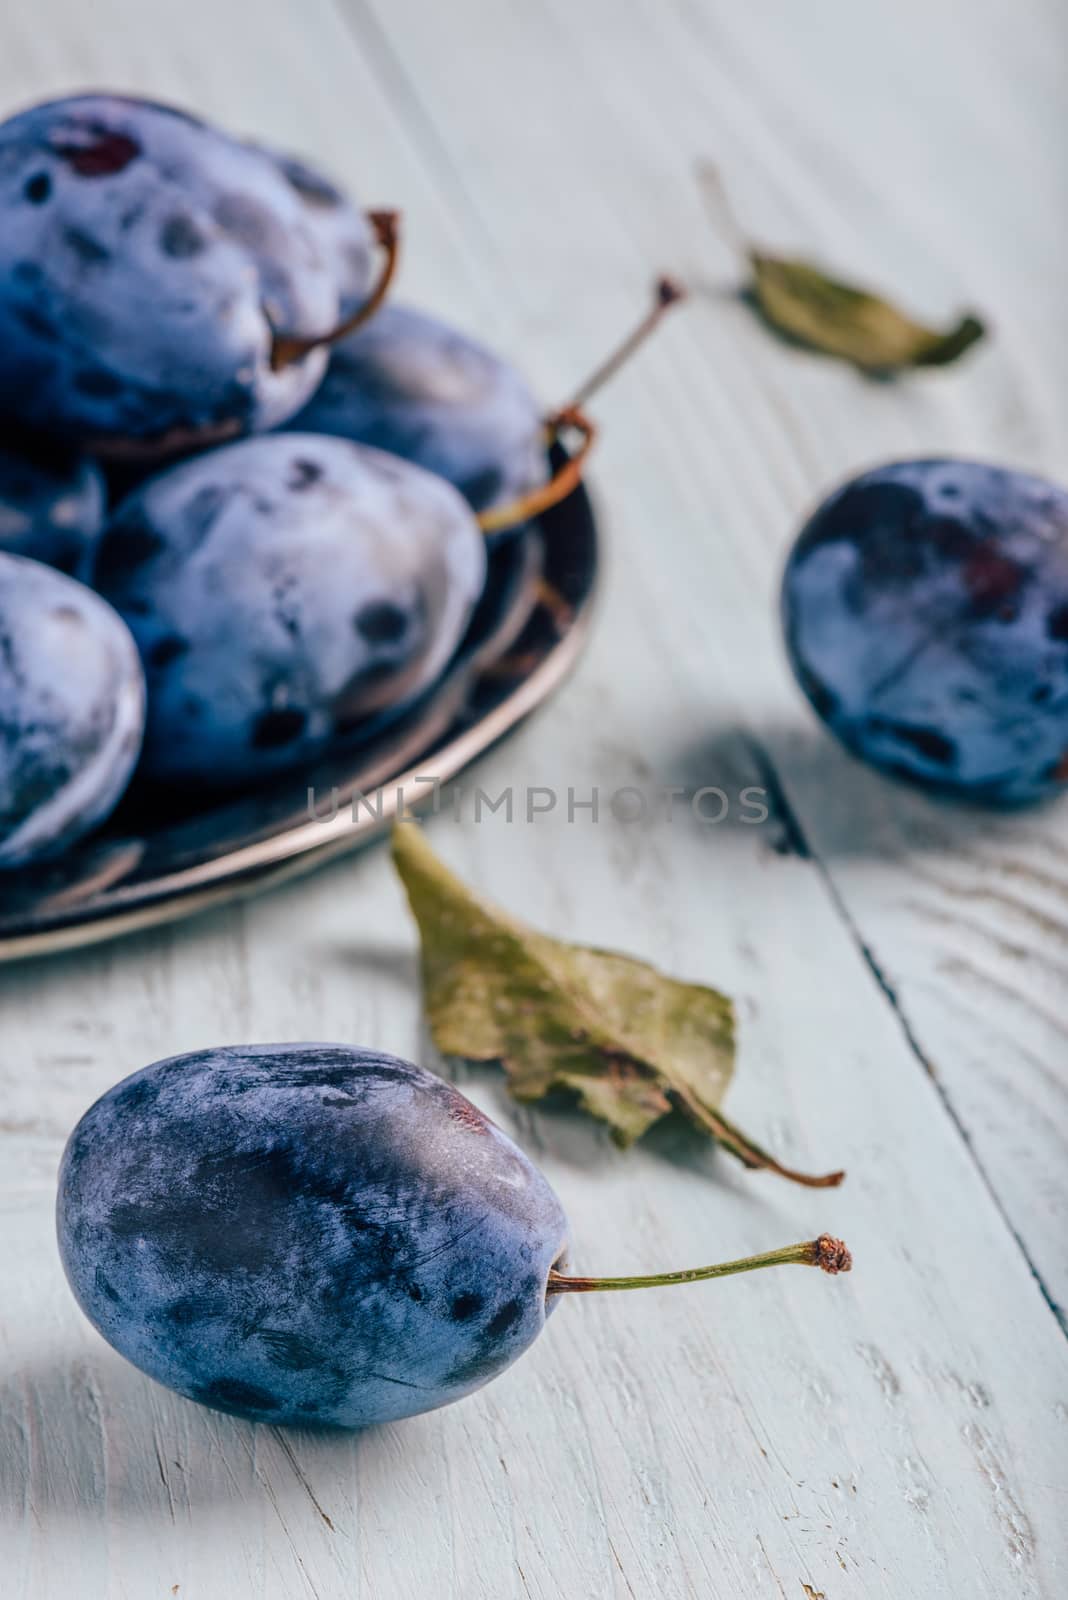 Plums on wooden surface with leaves by Seva_blsv